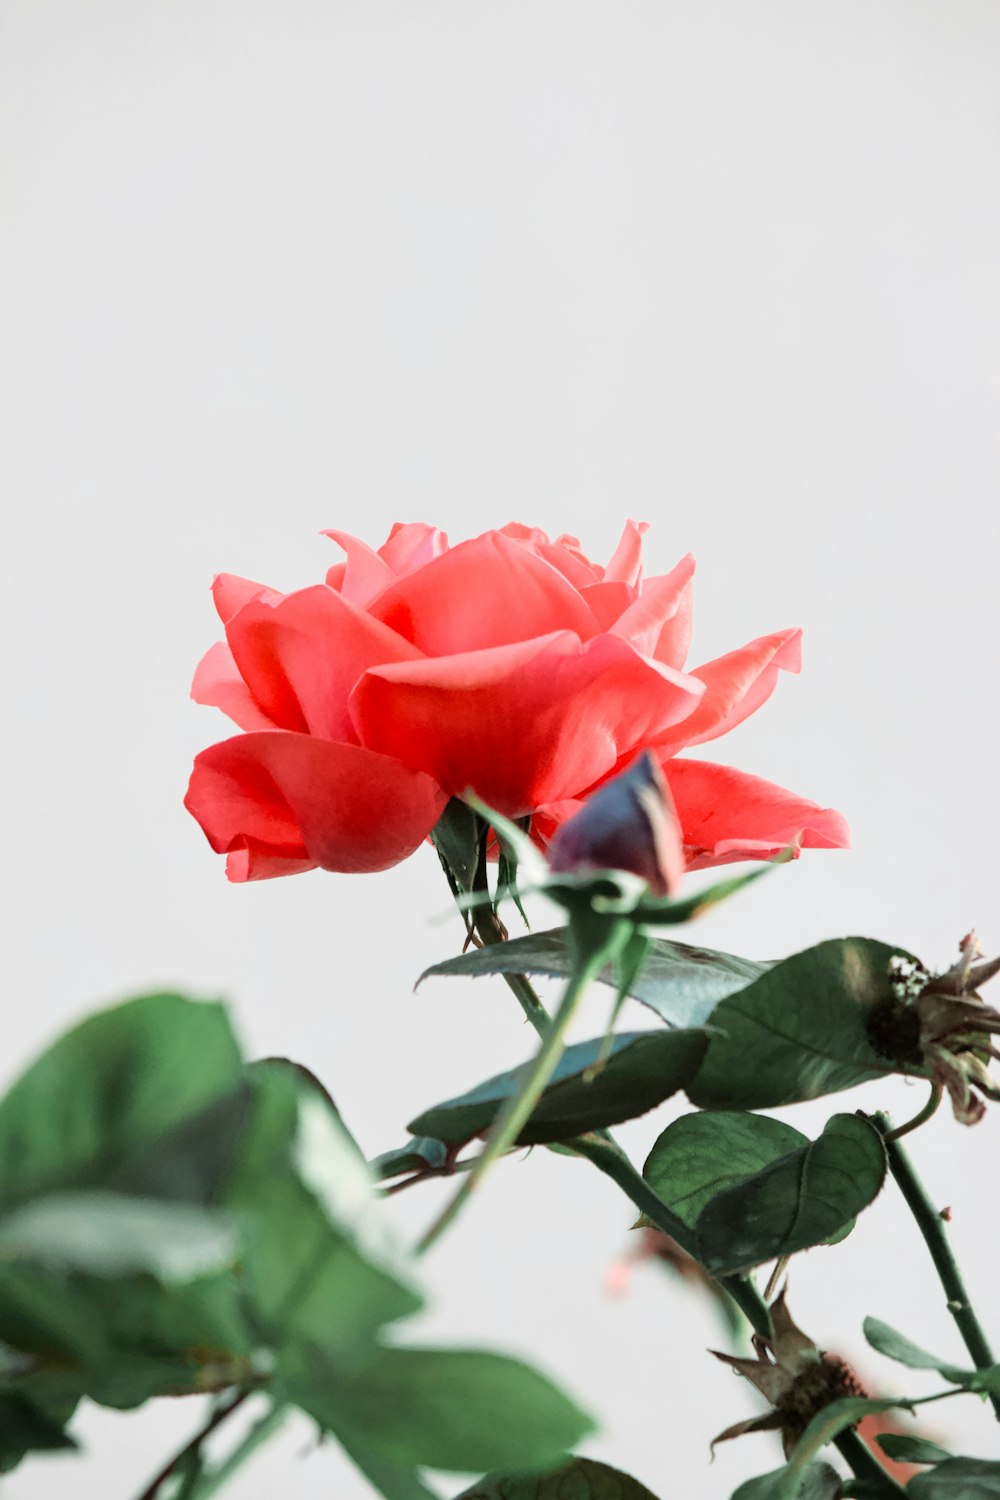 a red rose with green leaves on a white background